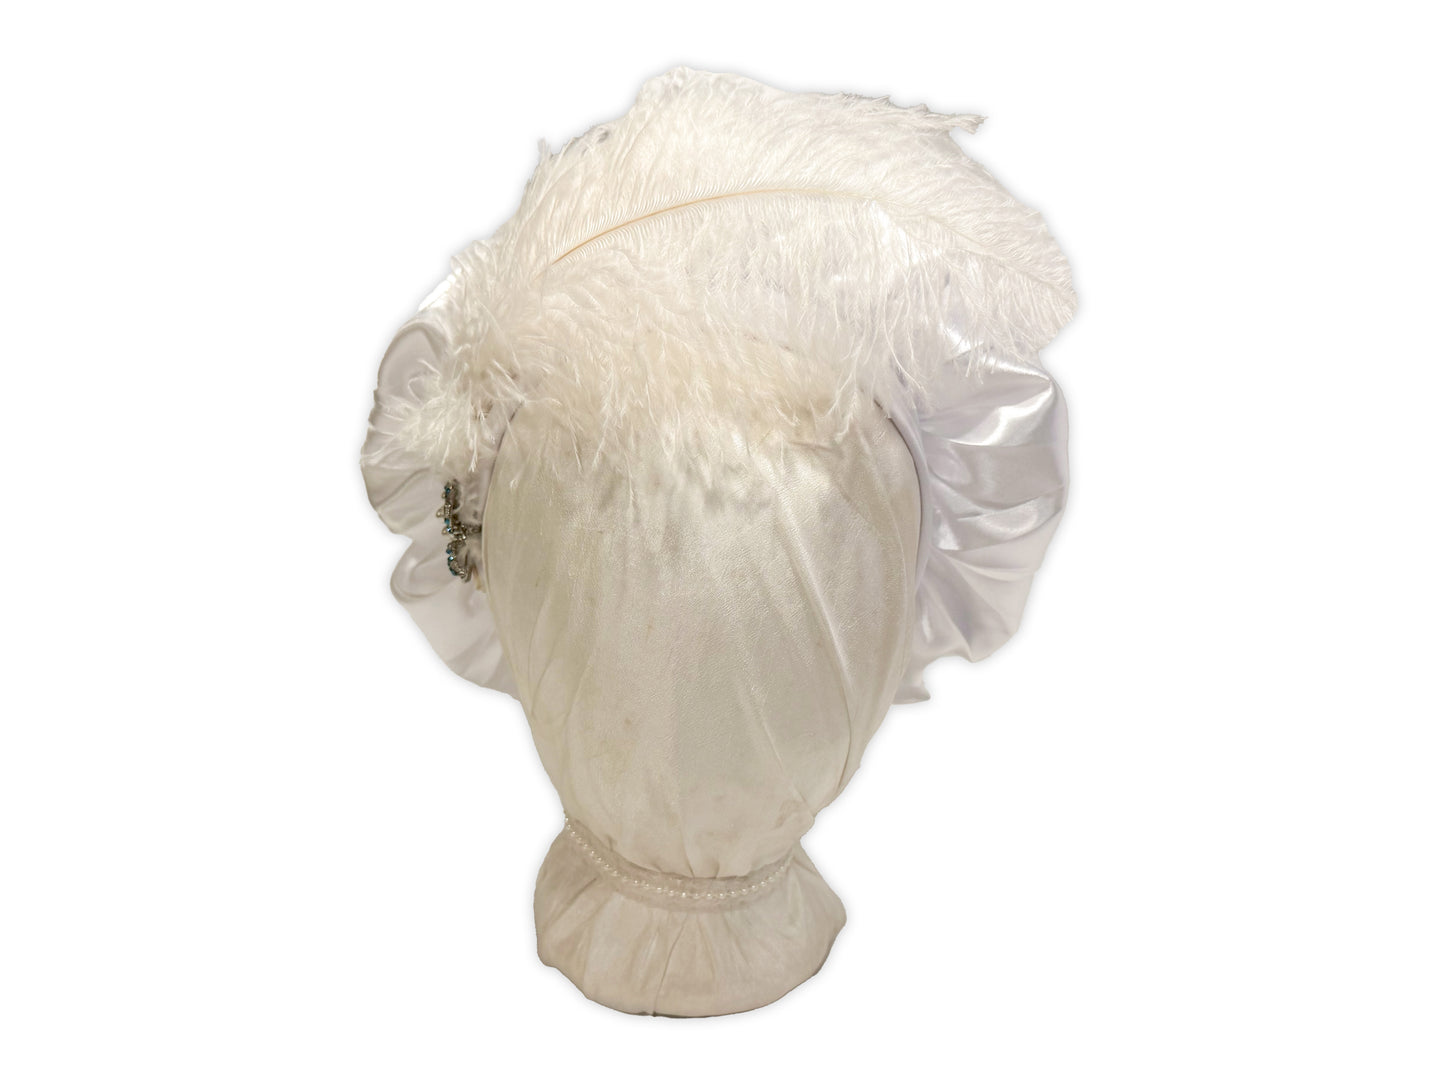 Lucy 3-in-1 bonnet with lace, ribbons and satin, plus removeable turban